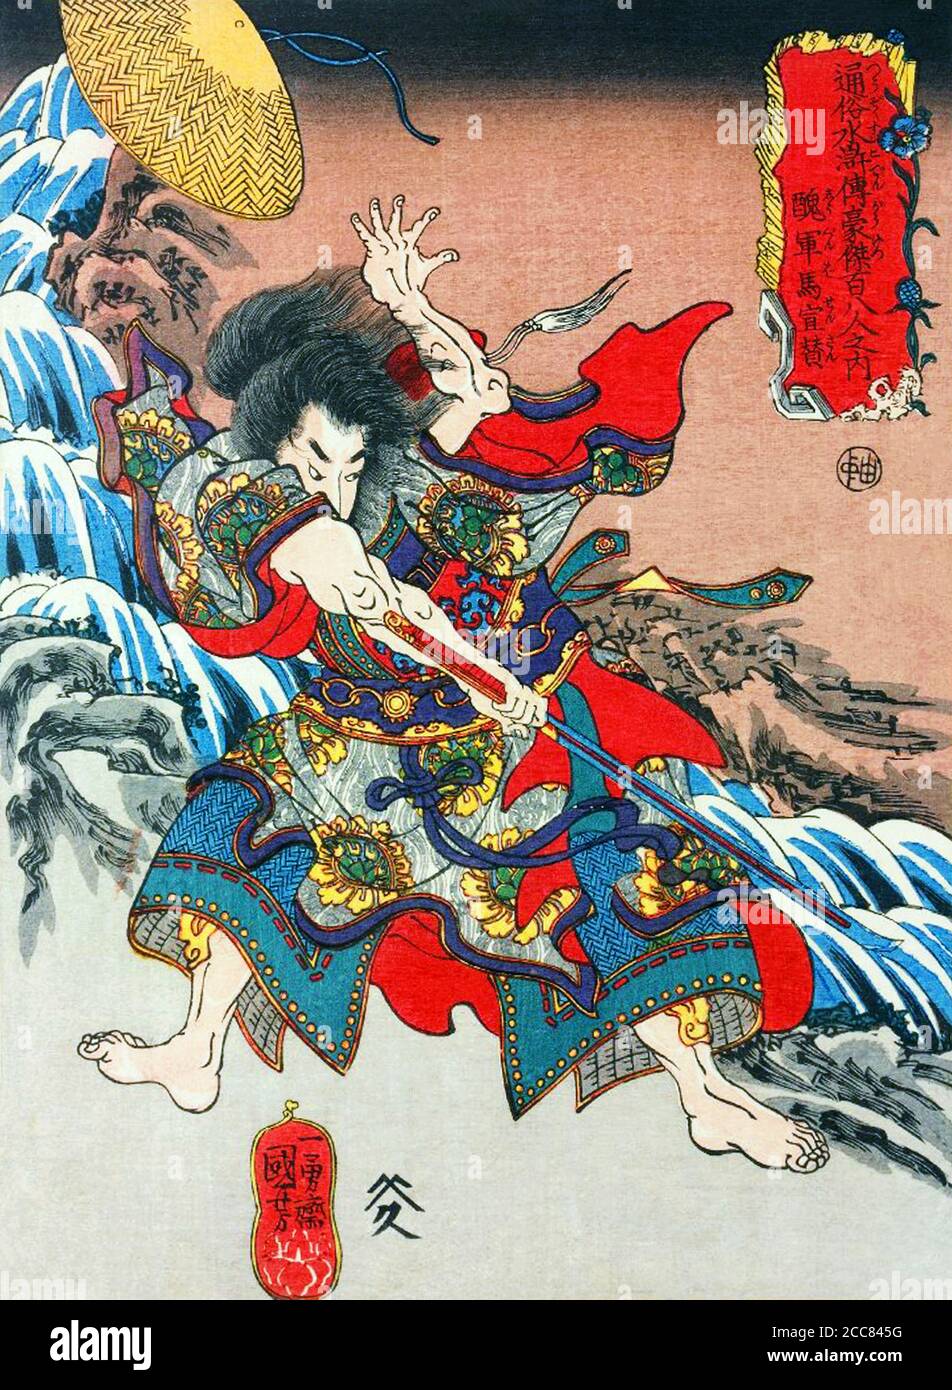 Japan The Ugly Royal Son In Law Xuan Zan Or Shugunba Sensan One Of The One Hundred And Eight Heroes Of The Water Margin Makes A Stroke With His Sword By A